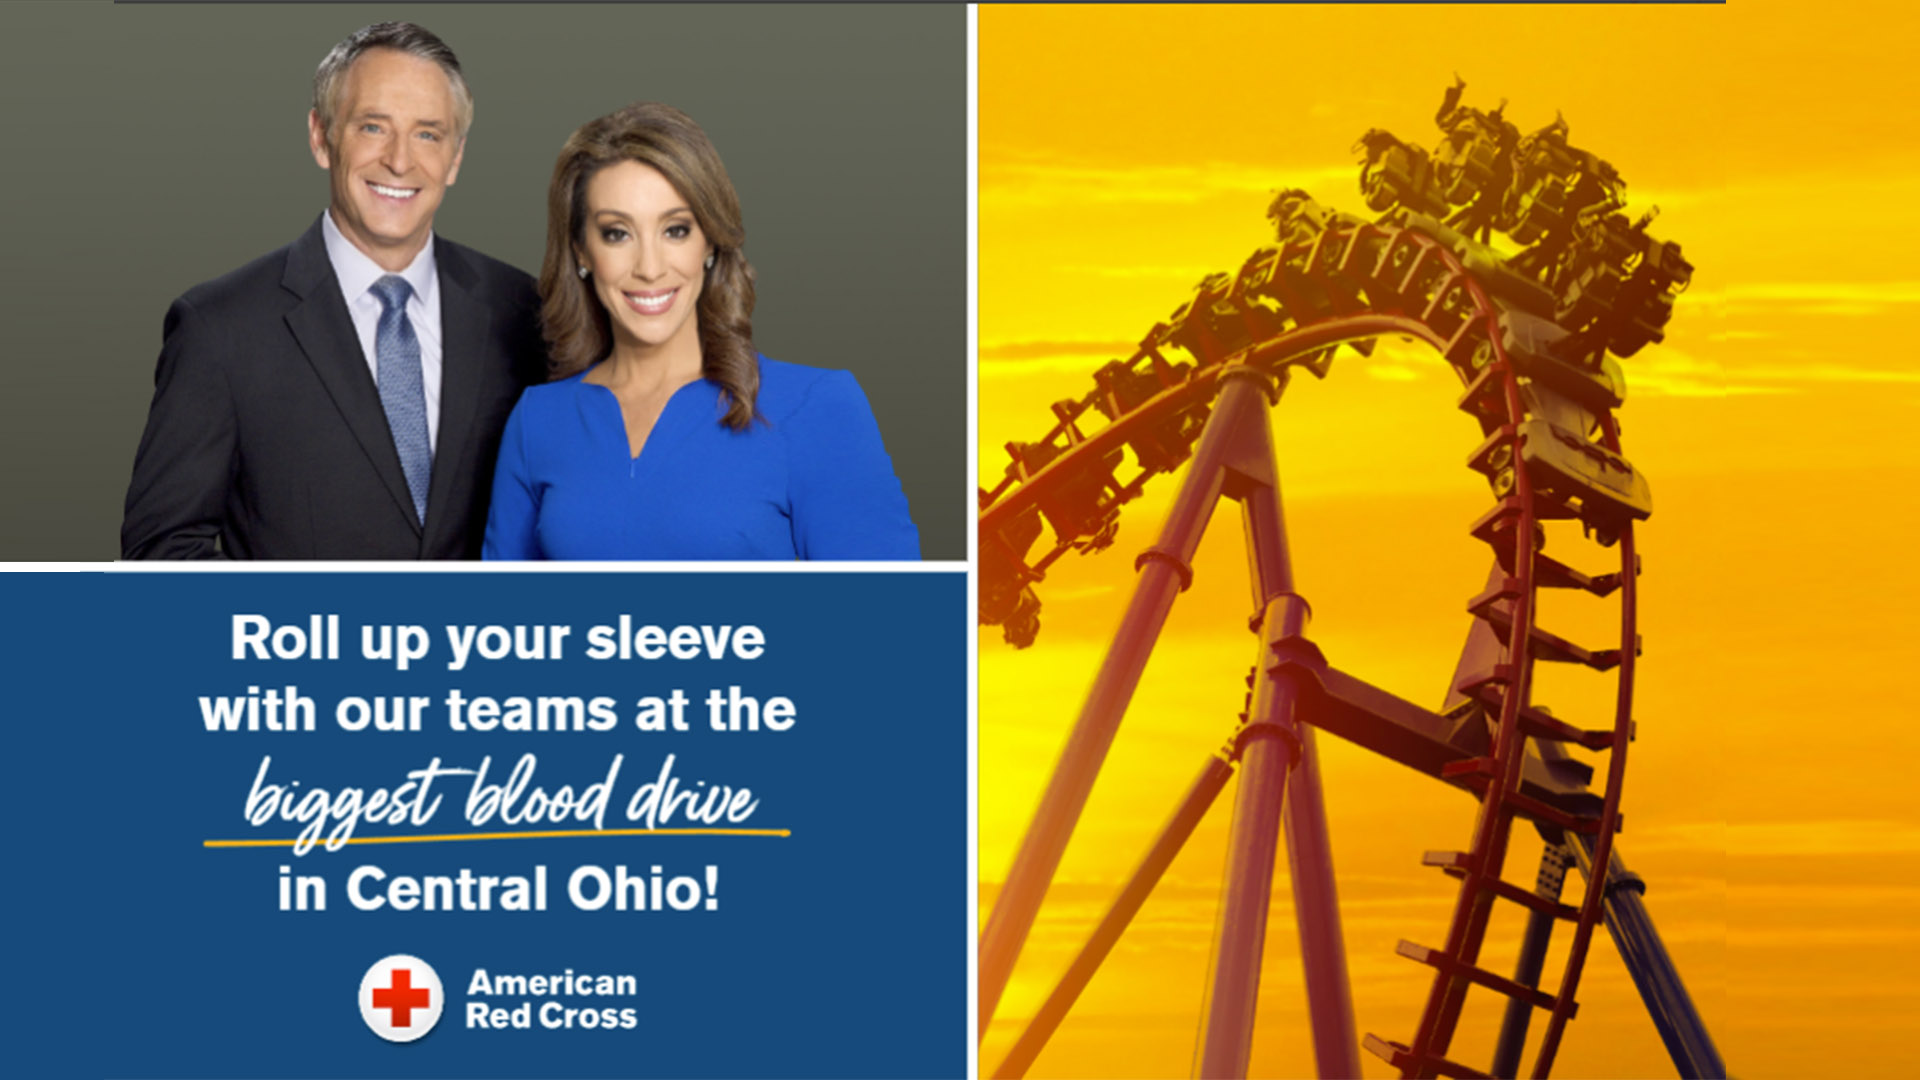 central and southern ohio news reporters and roller coaster graphic